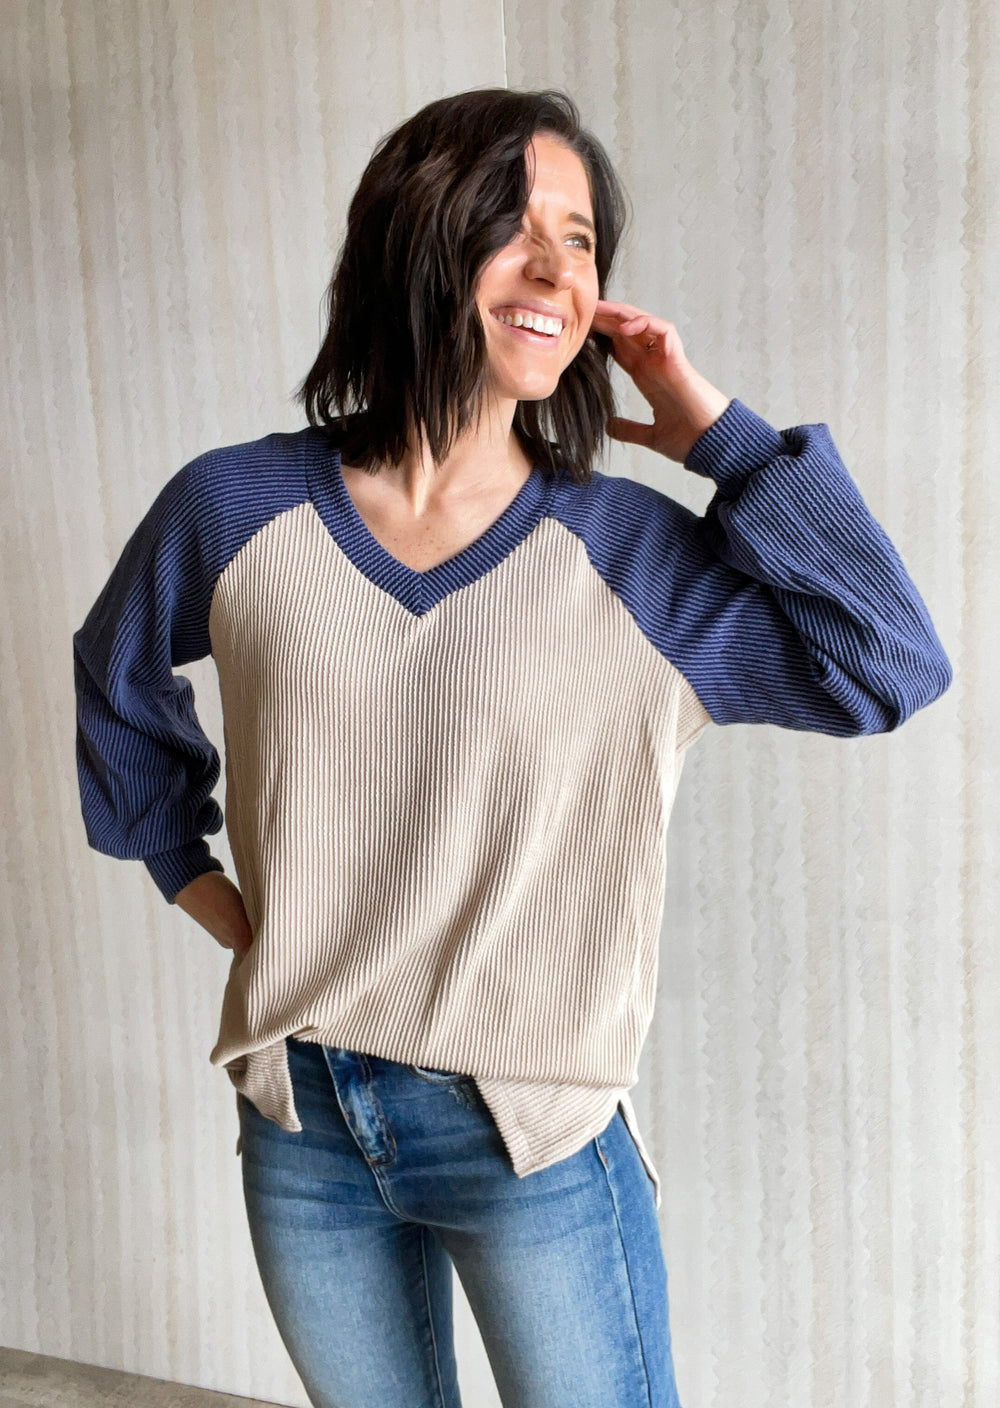 Navy and Taupe colorblock raglan texture top. An elevated spin on your typical baseball raglan, this long sleeve top features a v-neck, blue bishop sleeves, and a taupe colored relaxed fit body. Fabric is a lightweight urban rib knit.